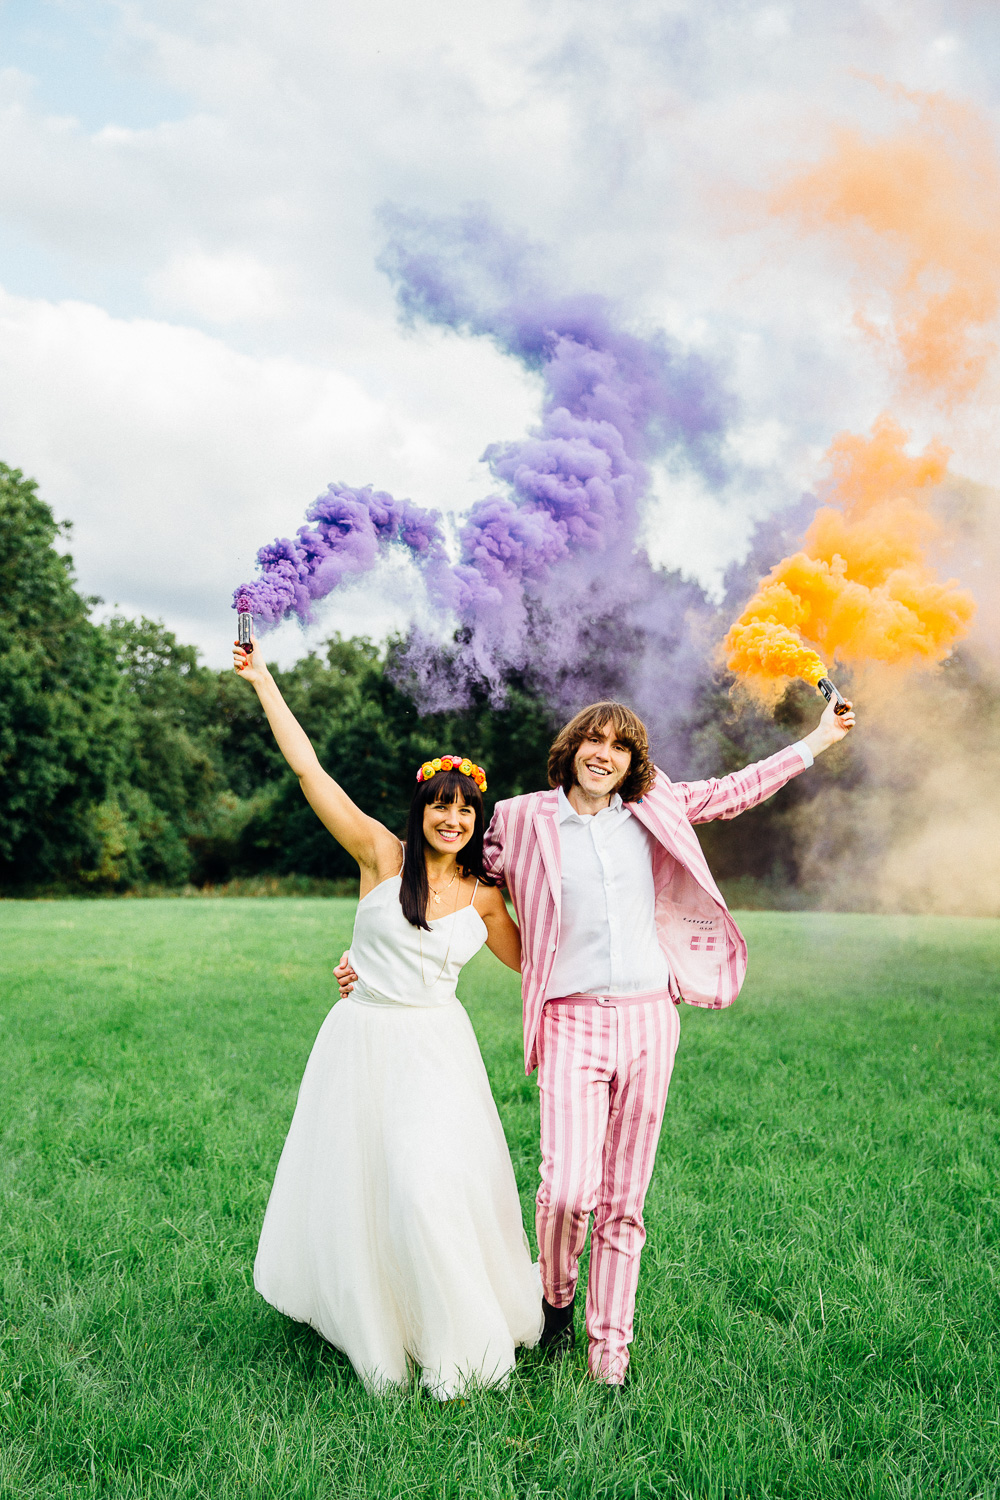 How to Get Started in Smoke Bomb Photography